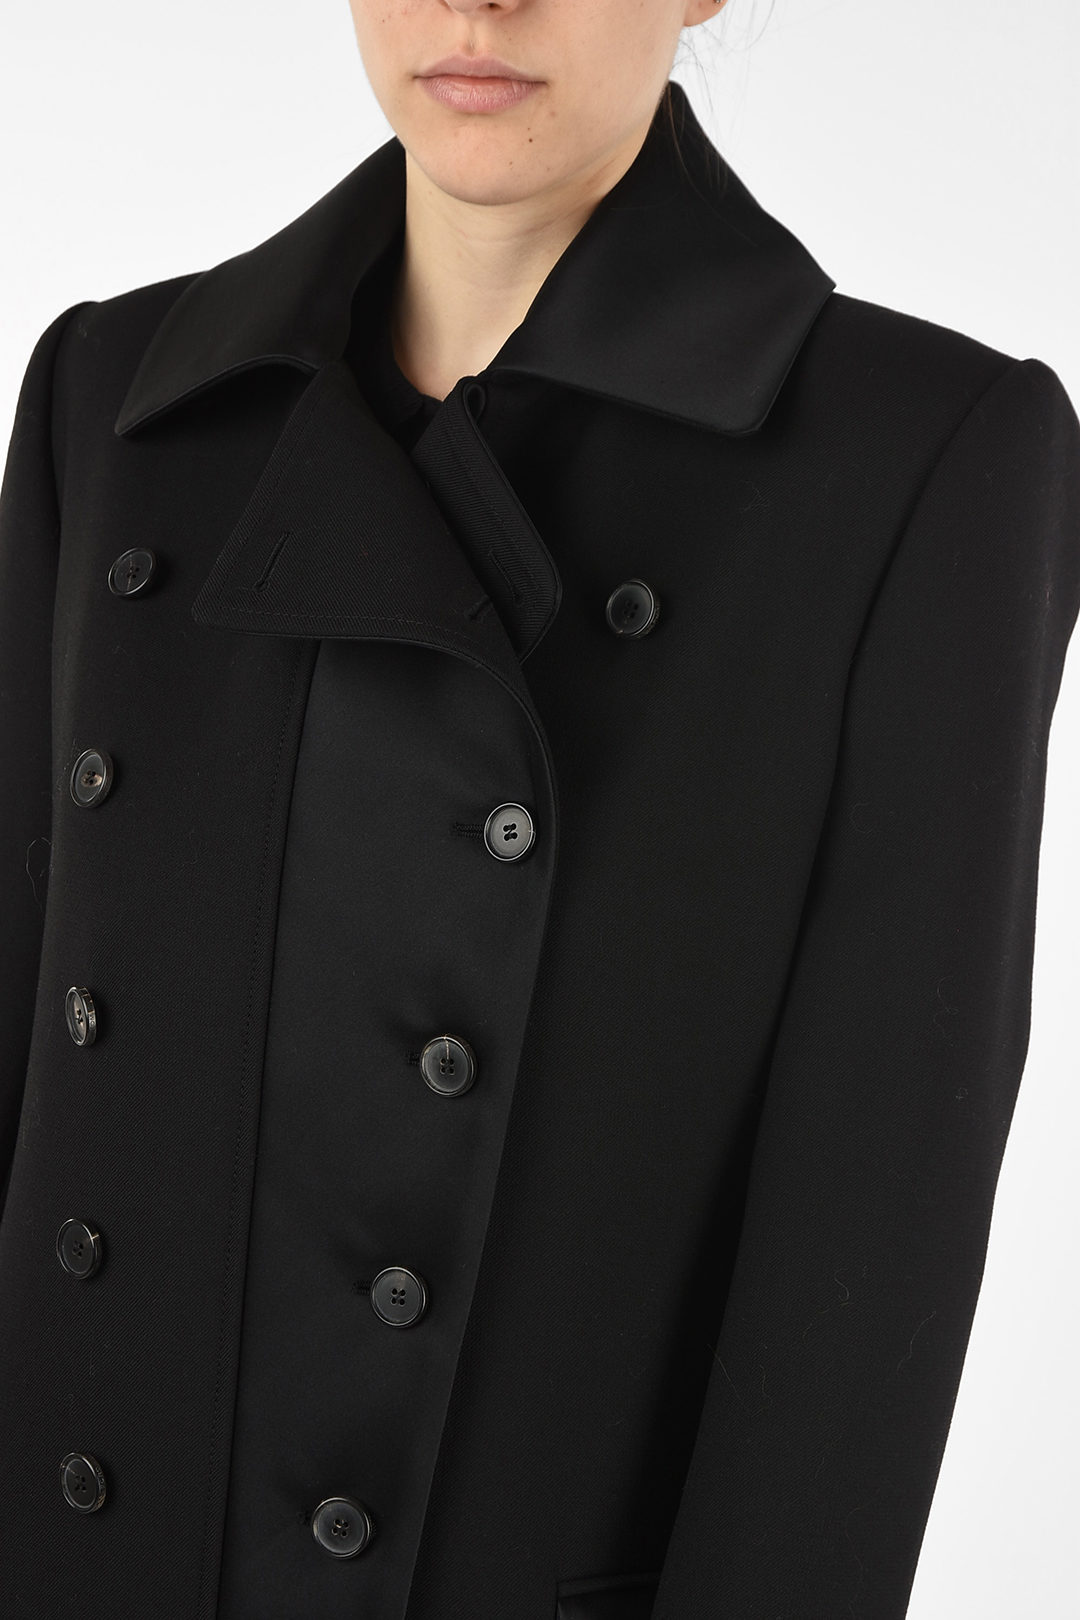 Tom Ford virgin wool double breasted balmacaan coat women - Glamood Outlet